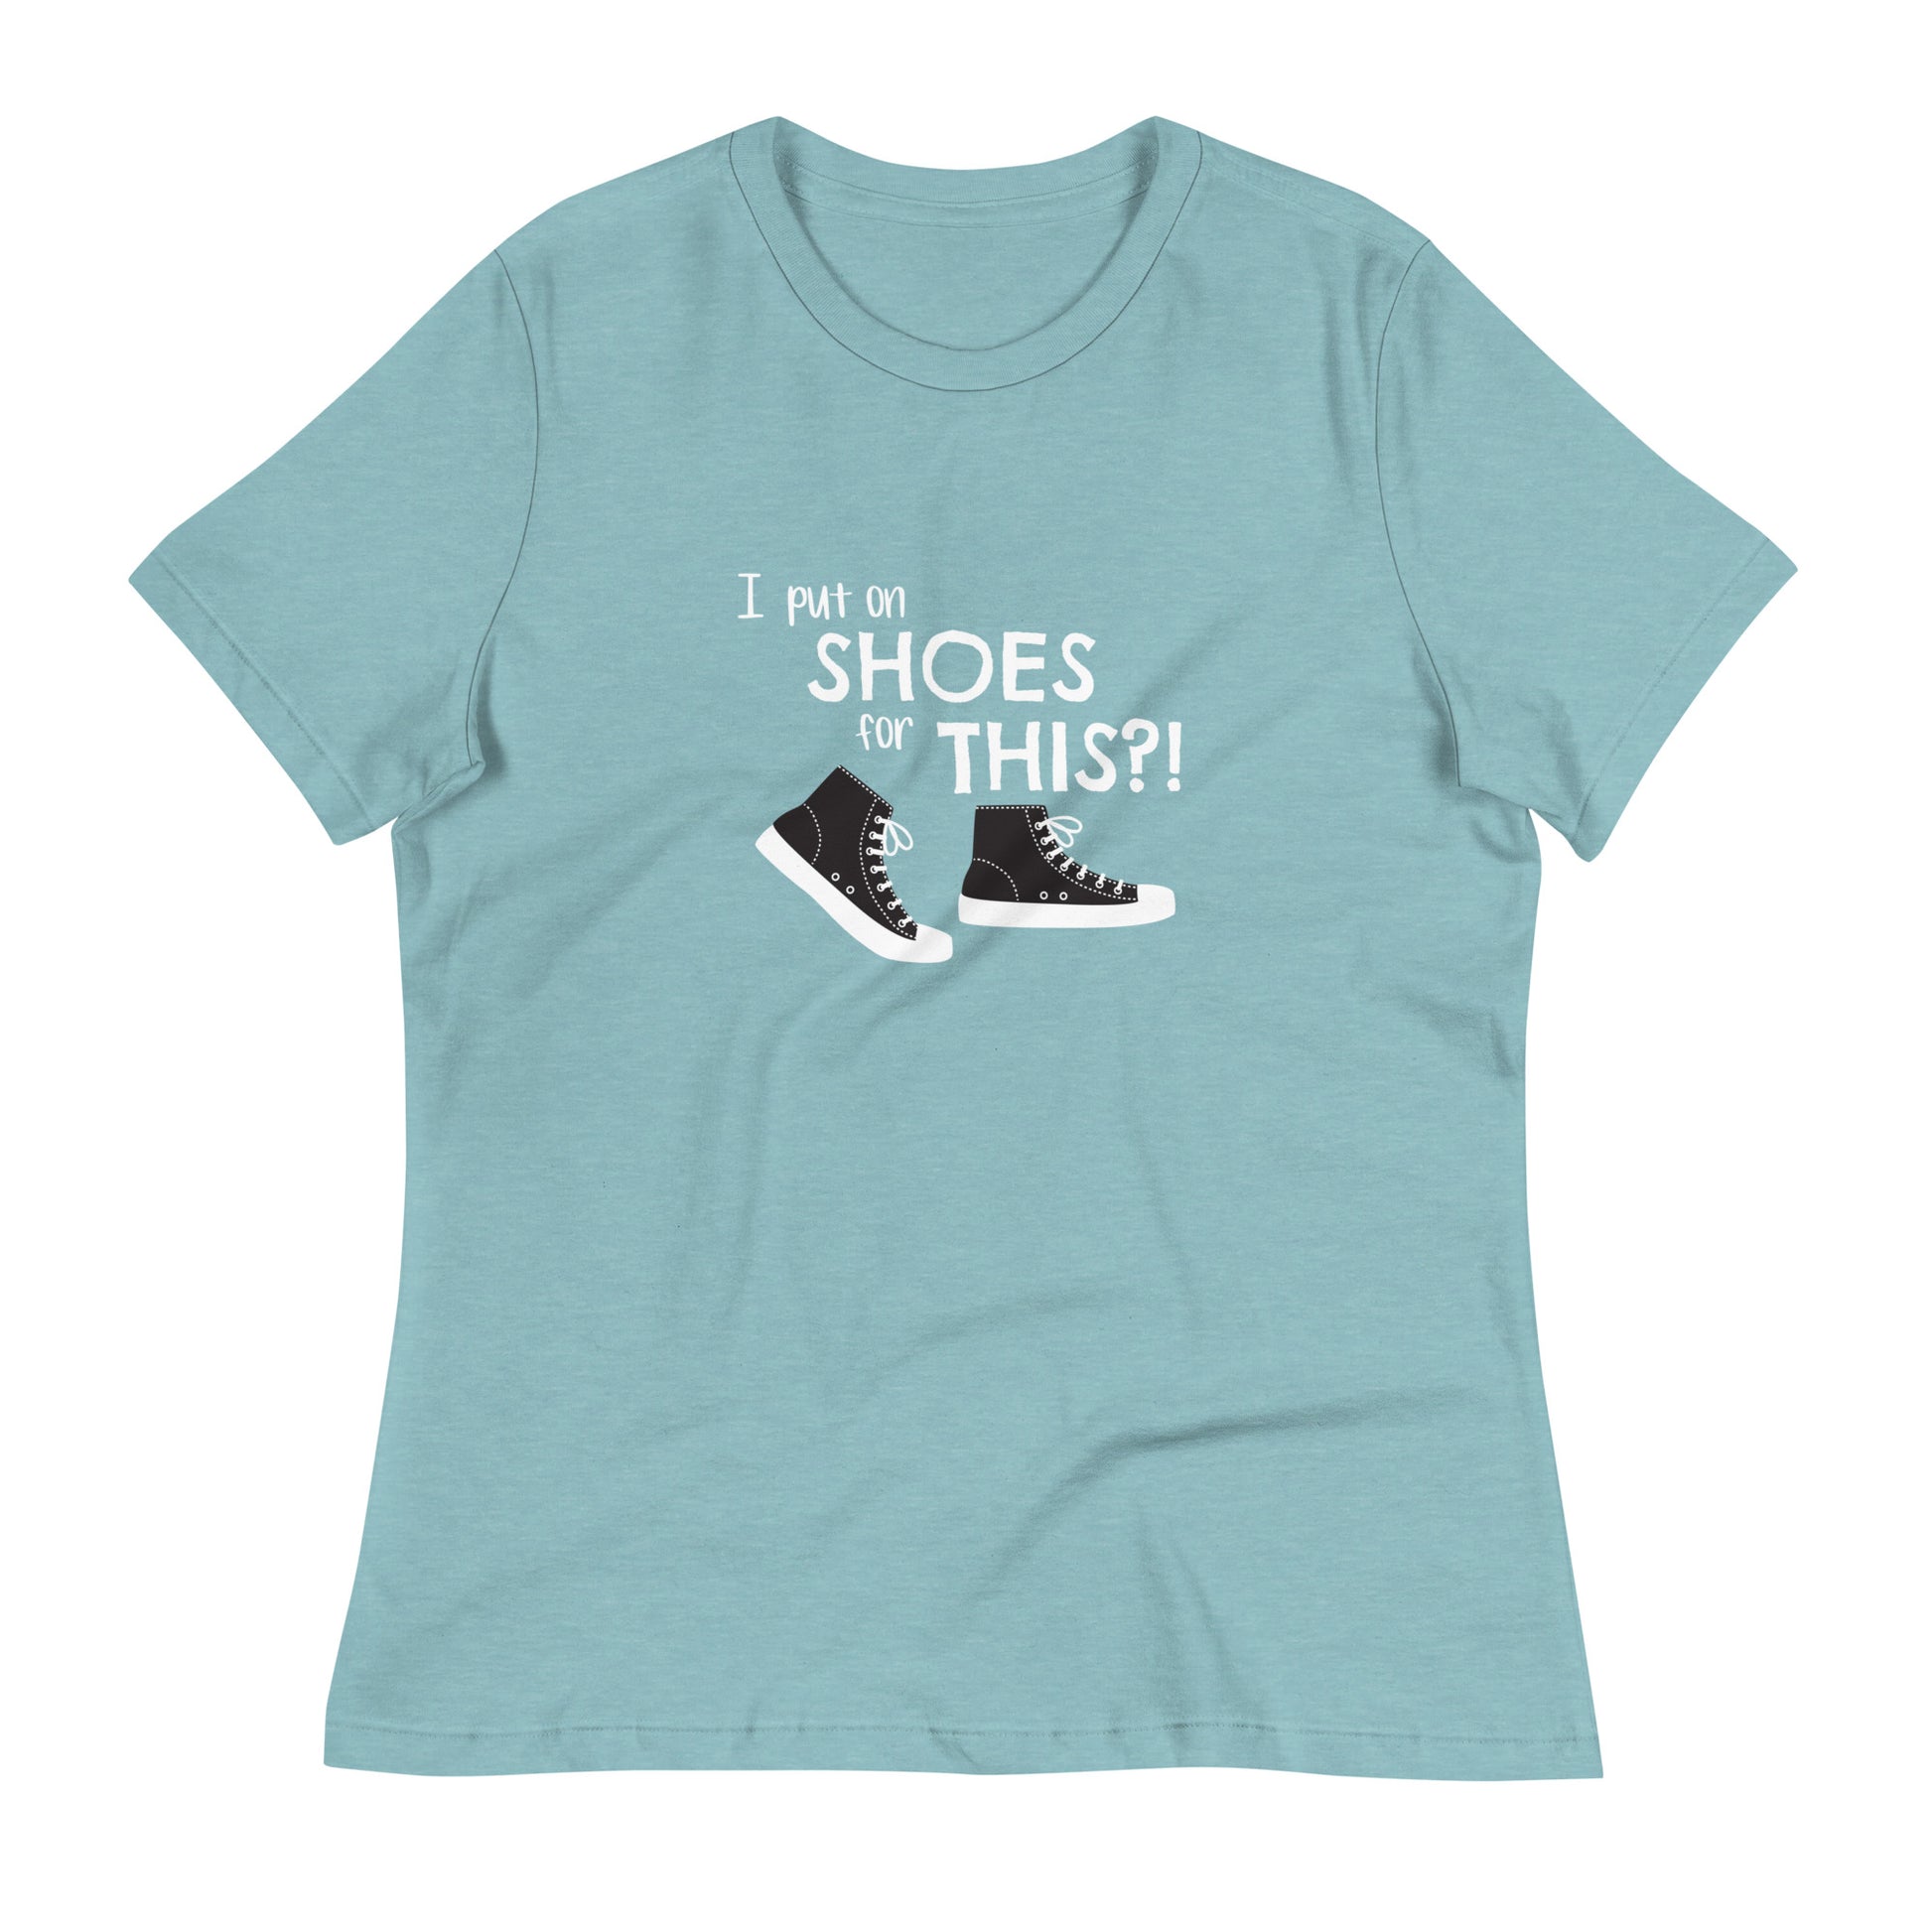 Heather Blue Lagoon women's relaxed fit t-shirt with graphic of black and white canvas "chuck" sneakers and text: "I put on SHOES for THIS?!"